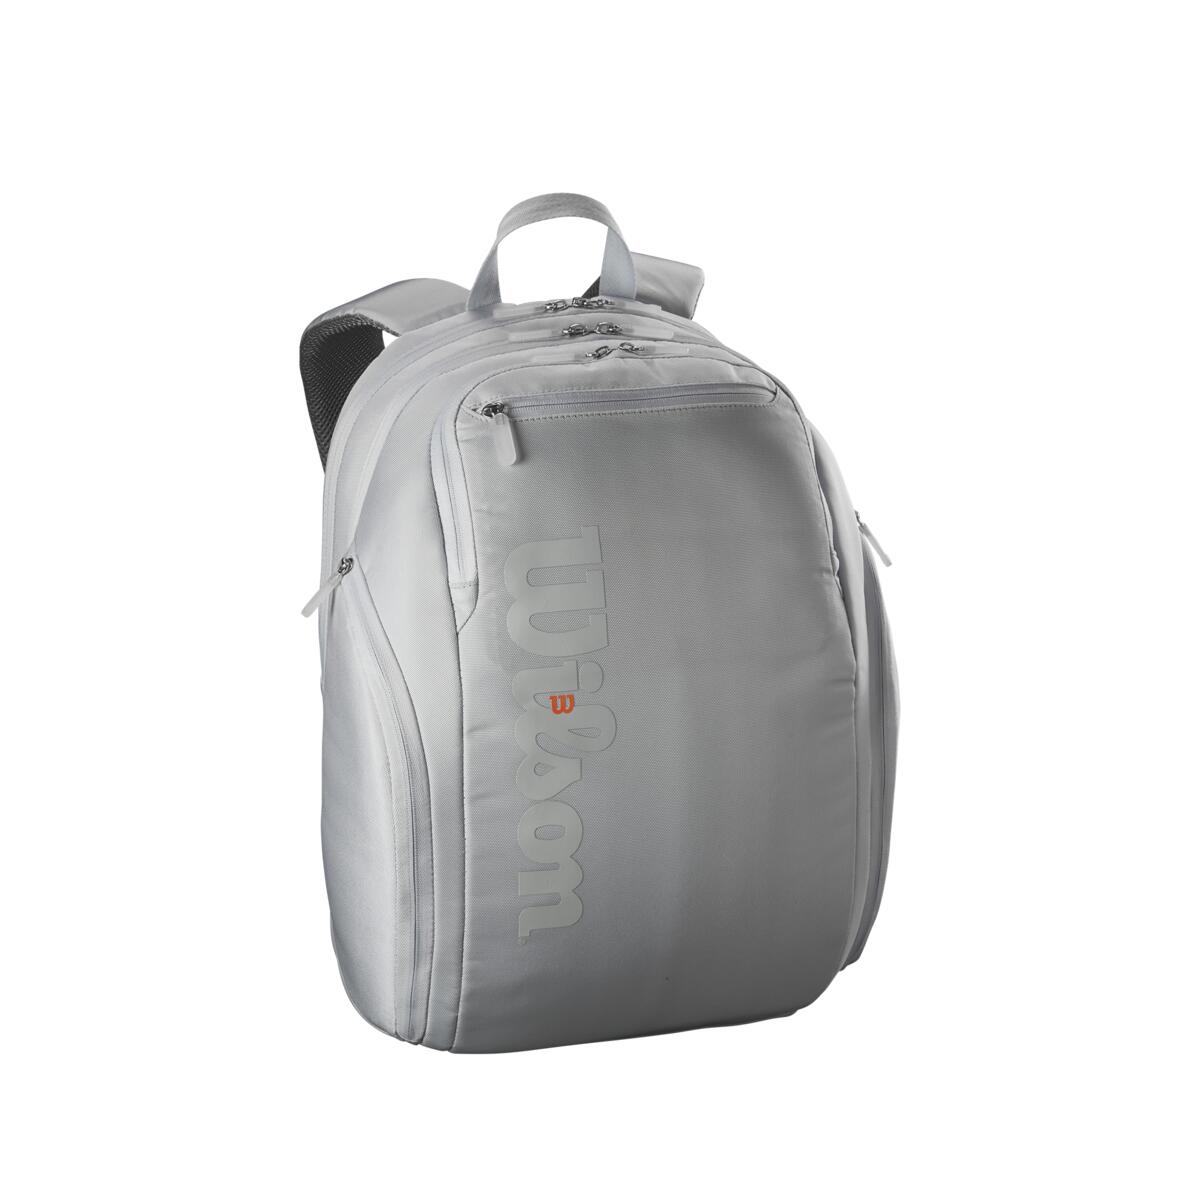 Wilson Shift Super Tour Backpack - Artic Ice